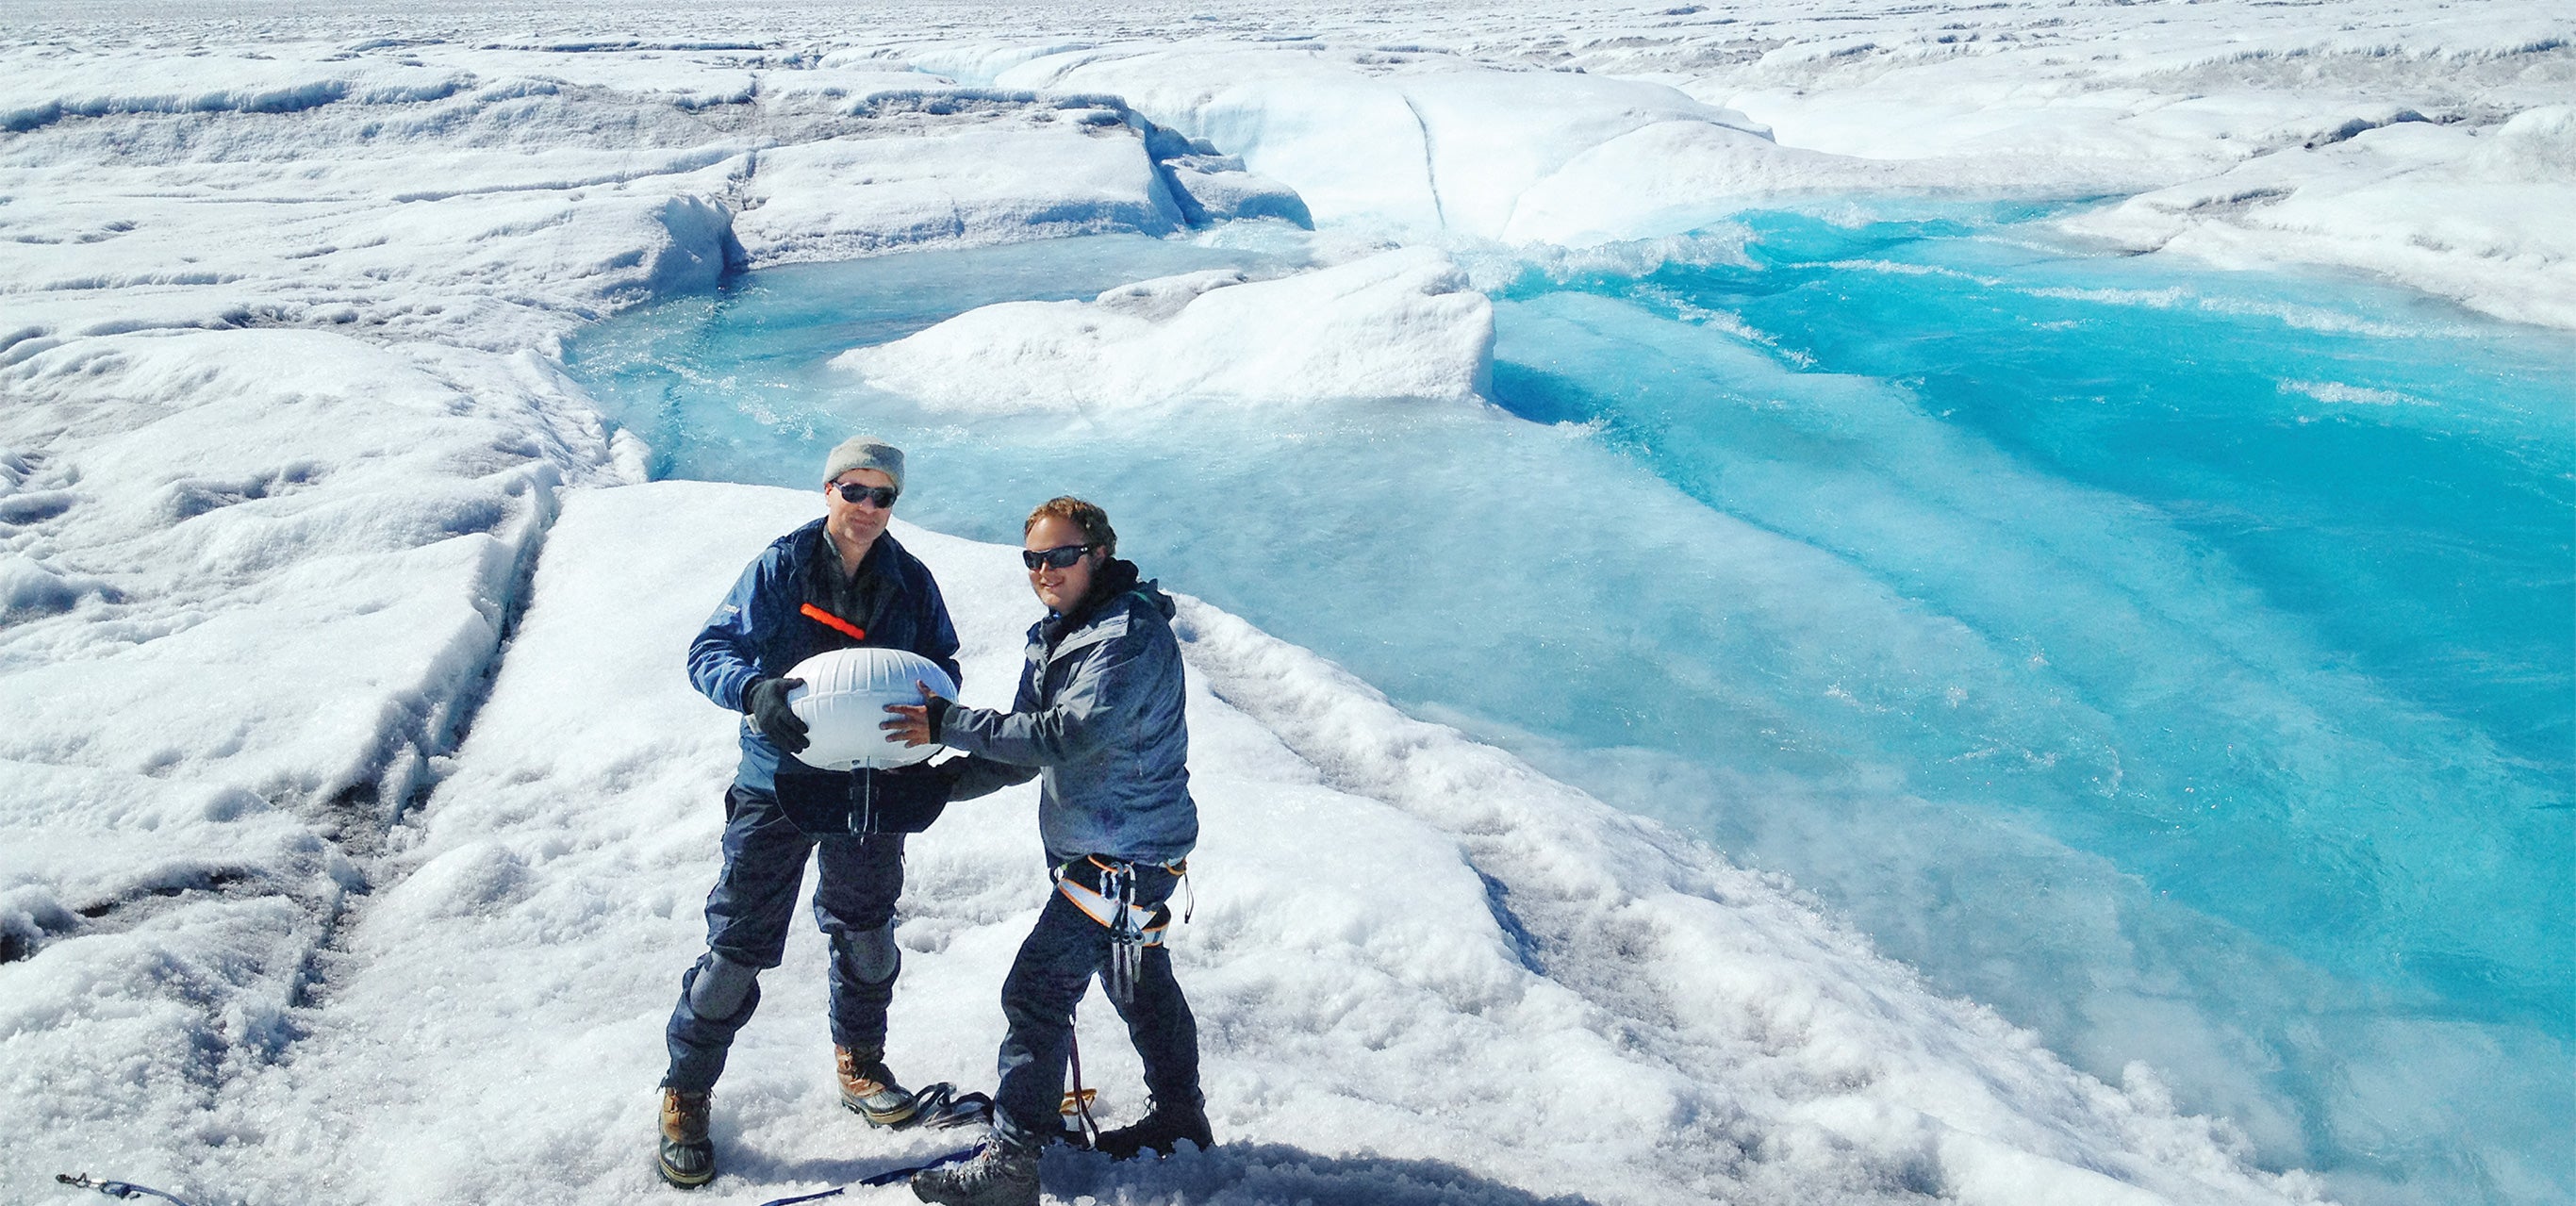 Professor Laurence C. Smith poses with a fellow researcher on a glacier in Greenland.